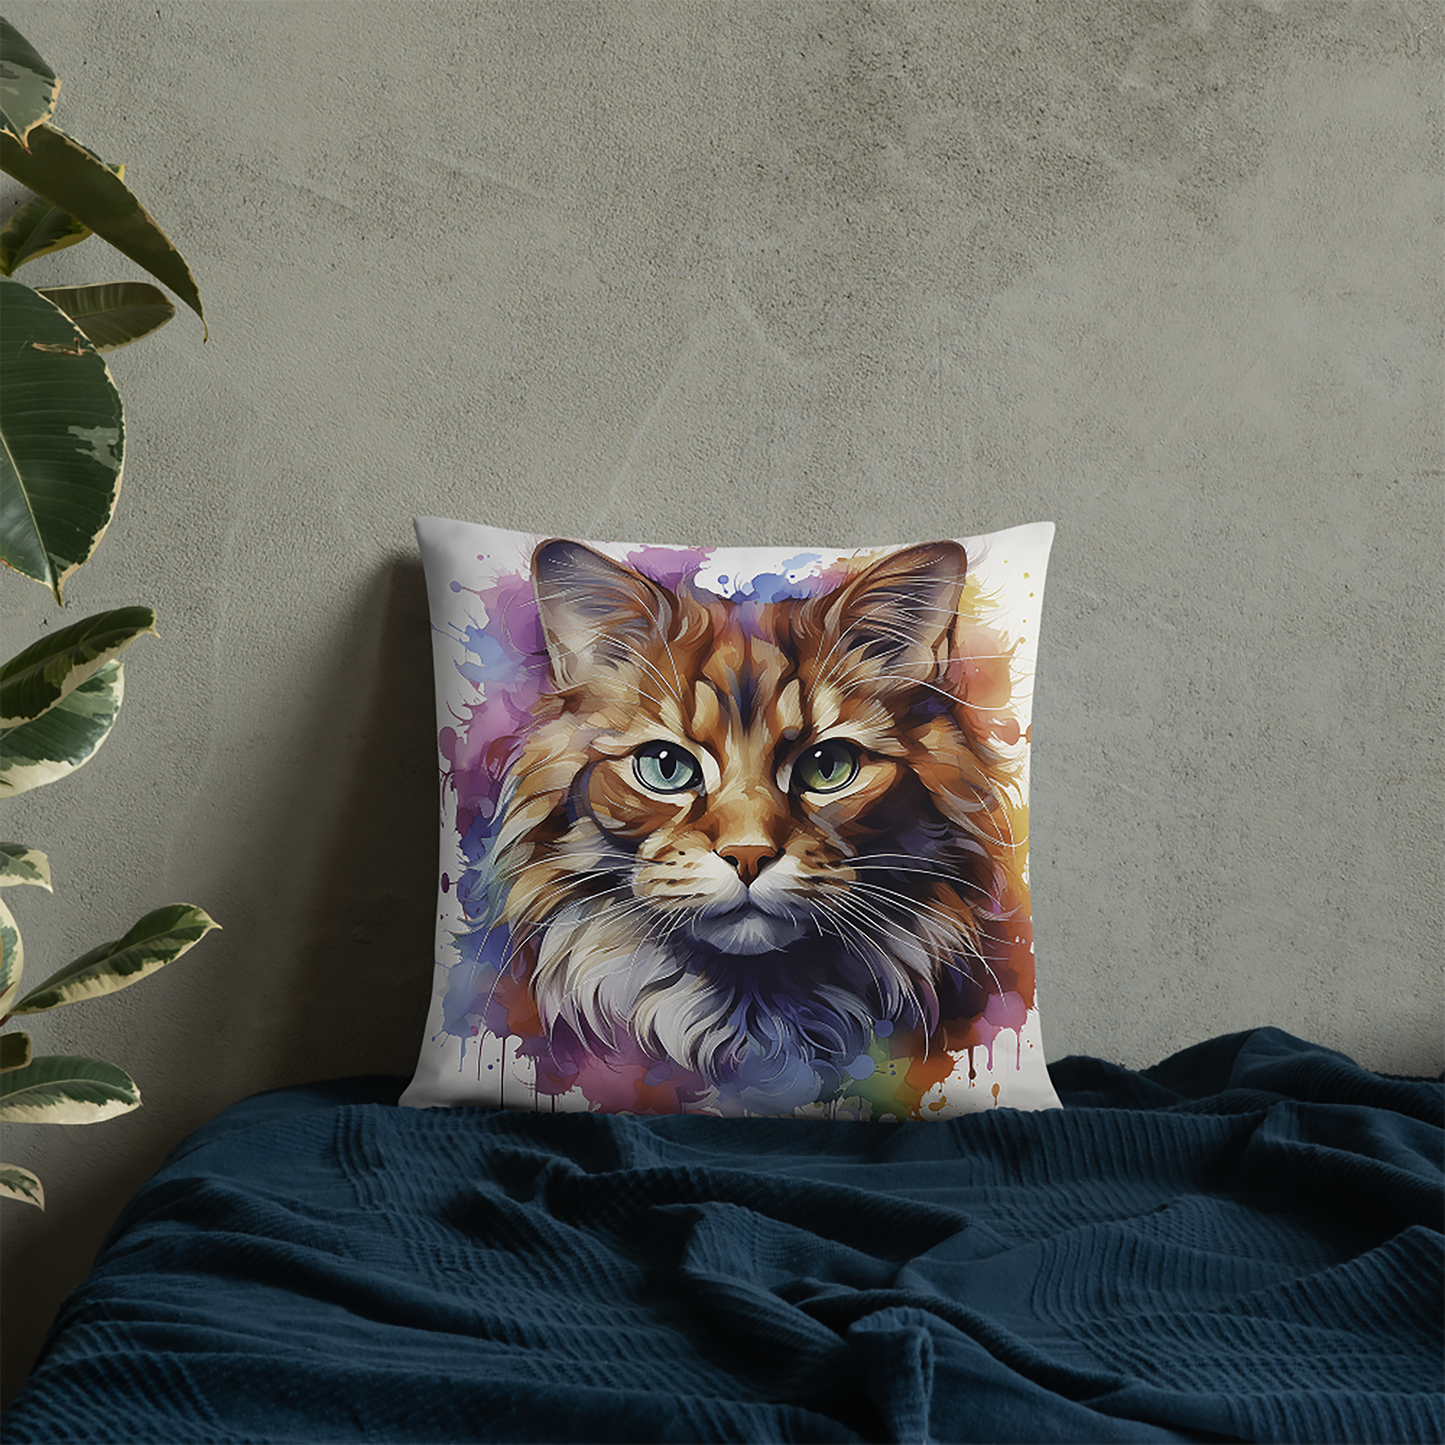 Cat Throw Pillow Watercolor Whiskers Heterochromatic Cat Polyester Decorative Cushion 18x18